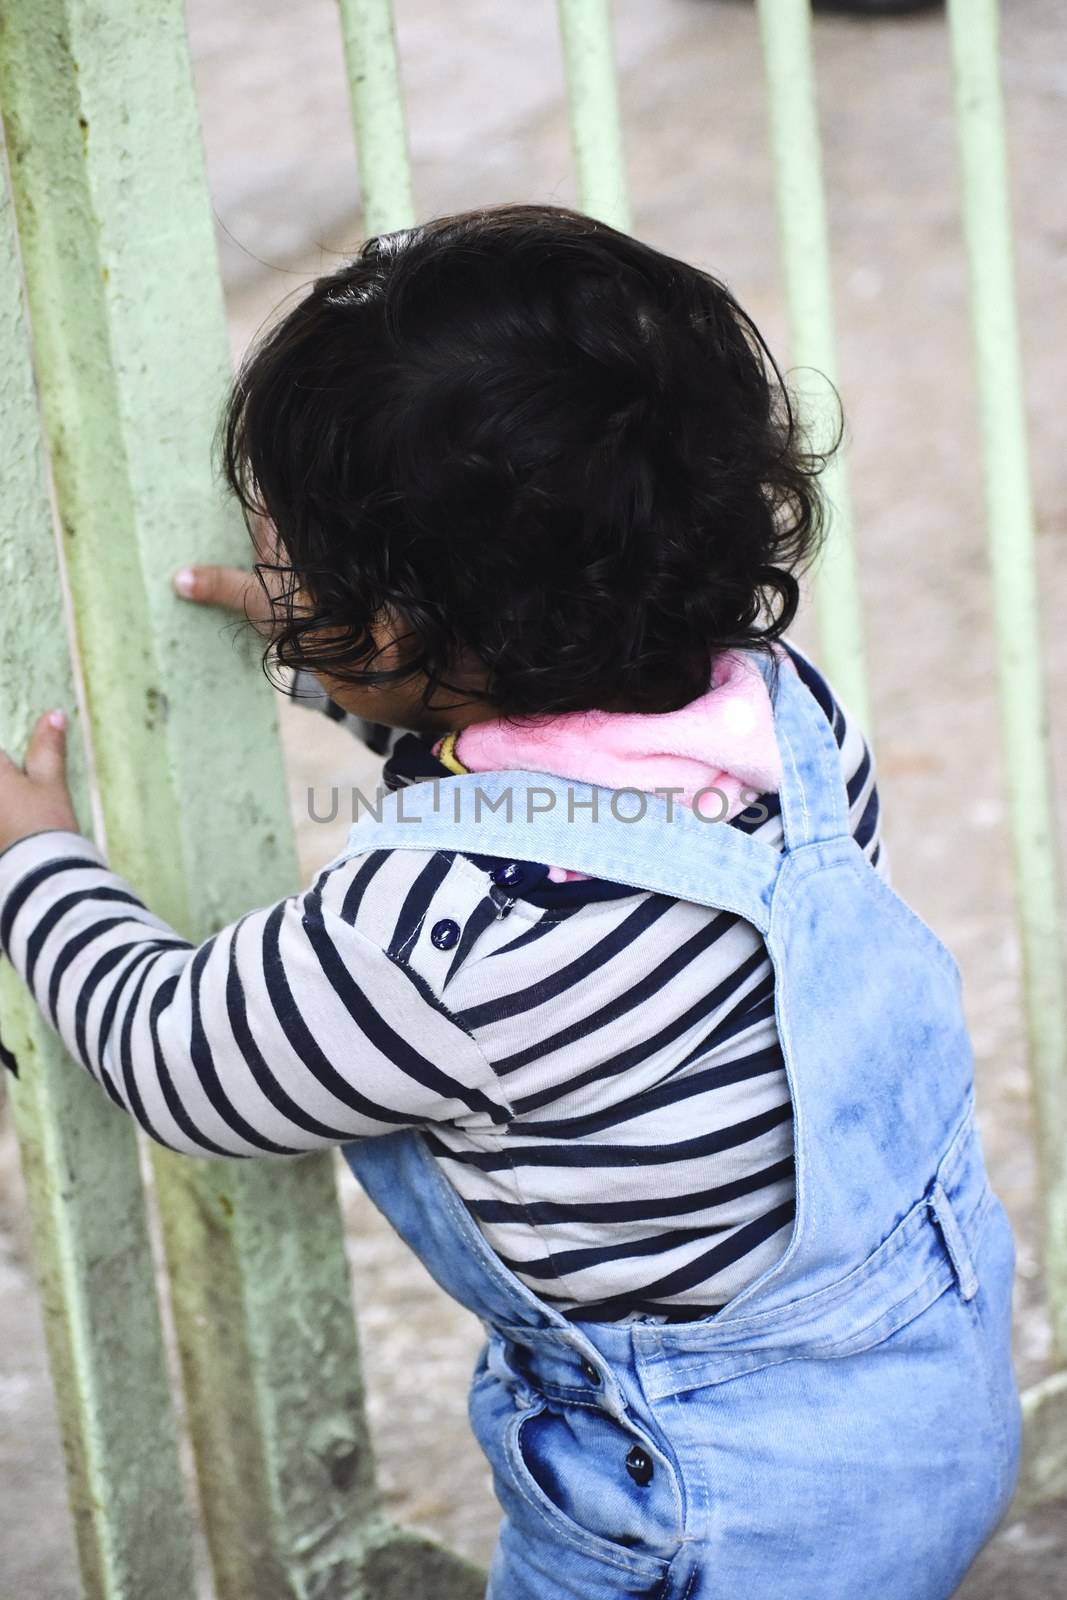 A Cute Little baby in playground by ravindrabhu165165@gmail.com